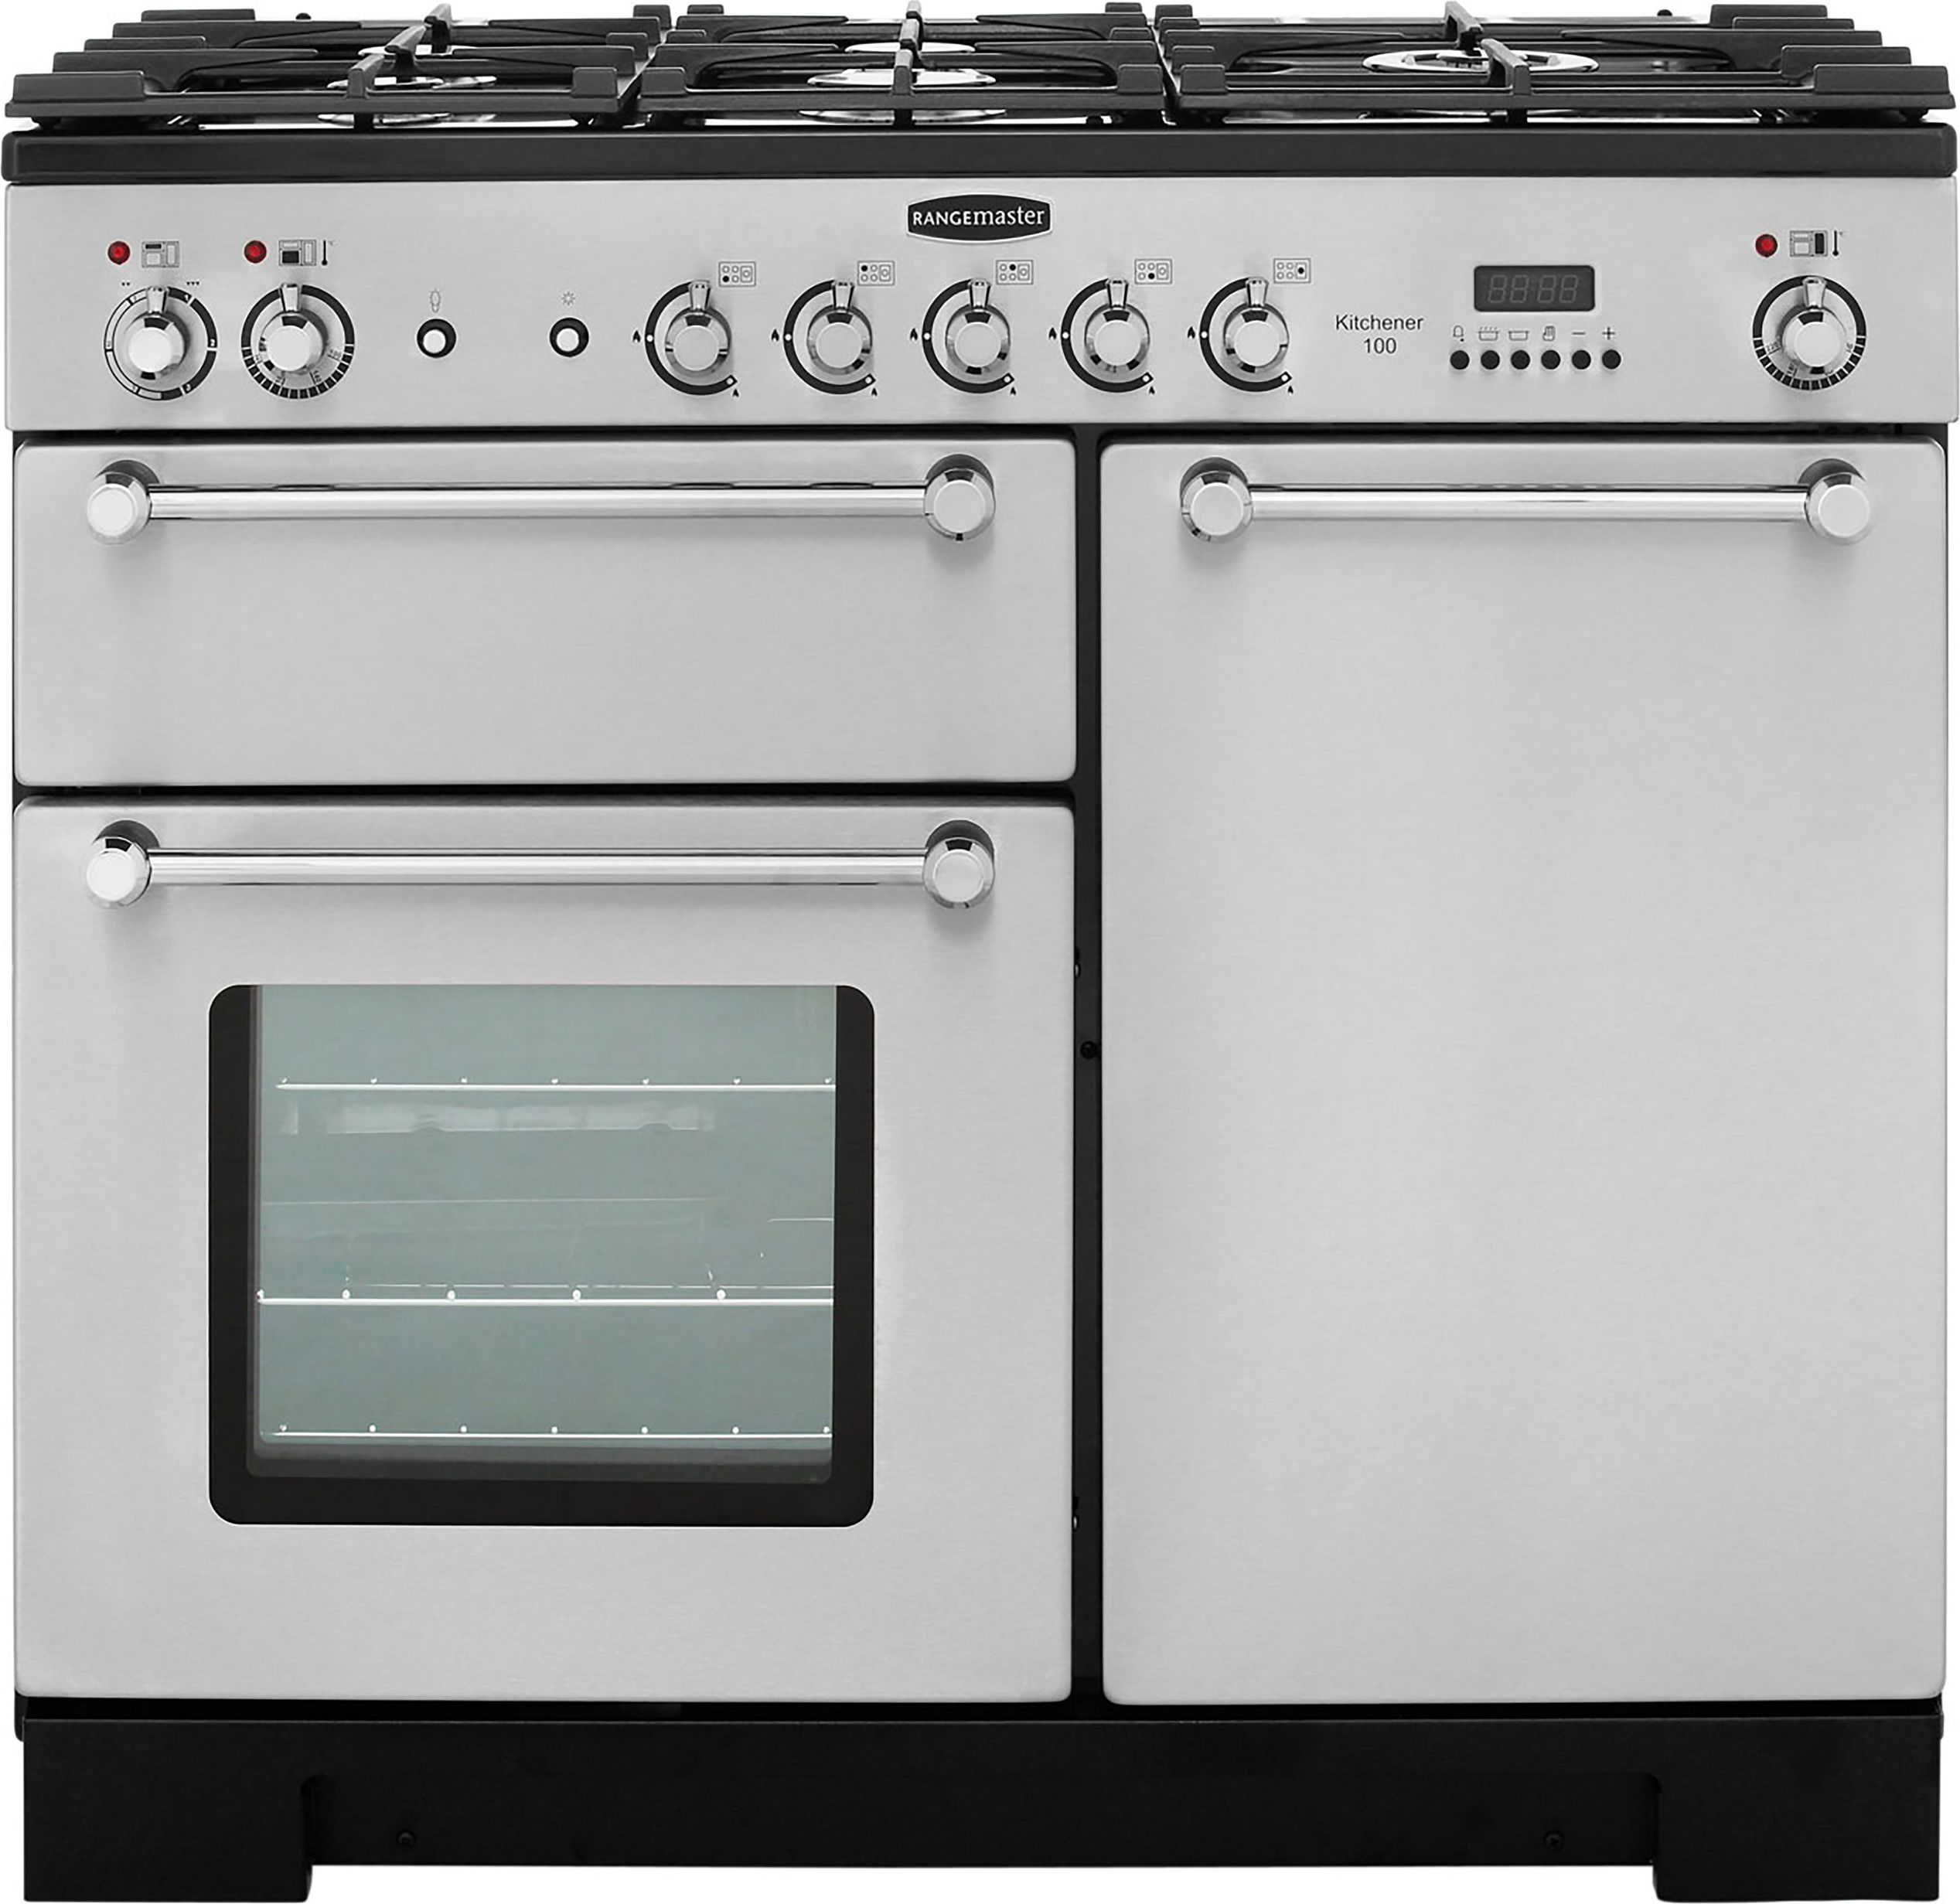 Rangemaster Kitchener KCH100DFFSS/C 100cm Dual Fuel Range Cooker - Stainless Steel / Chrome - A/A Rated, Stainless Steel